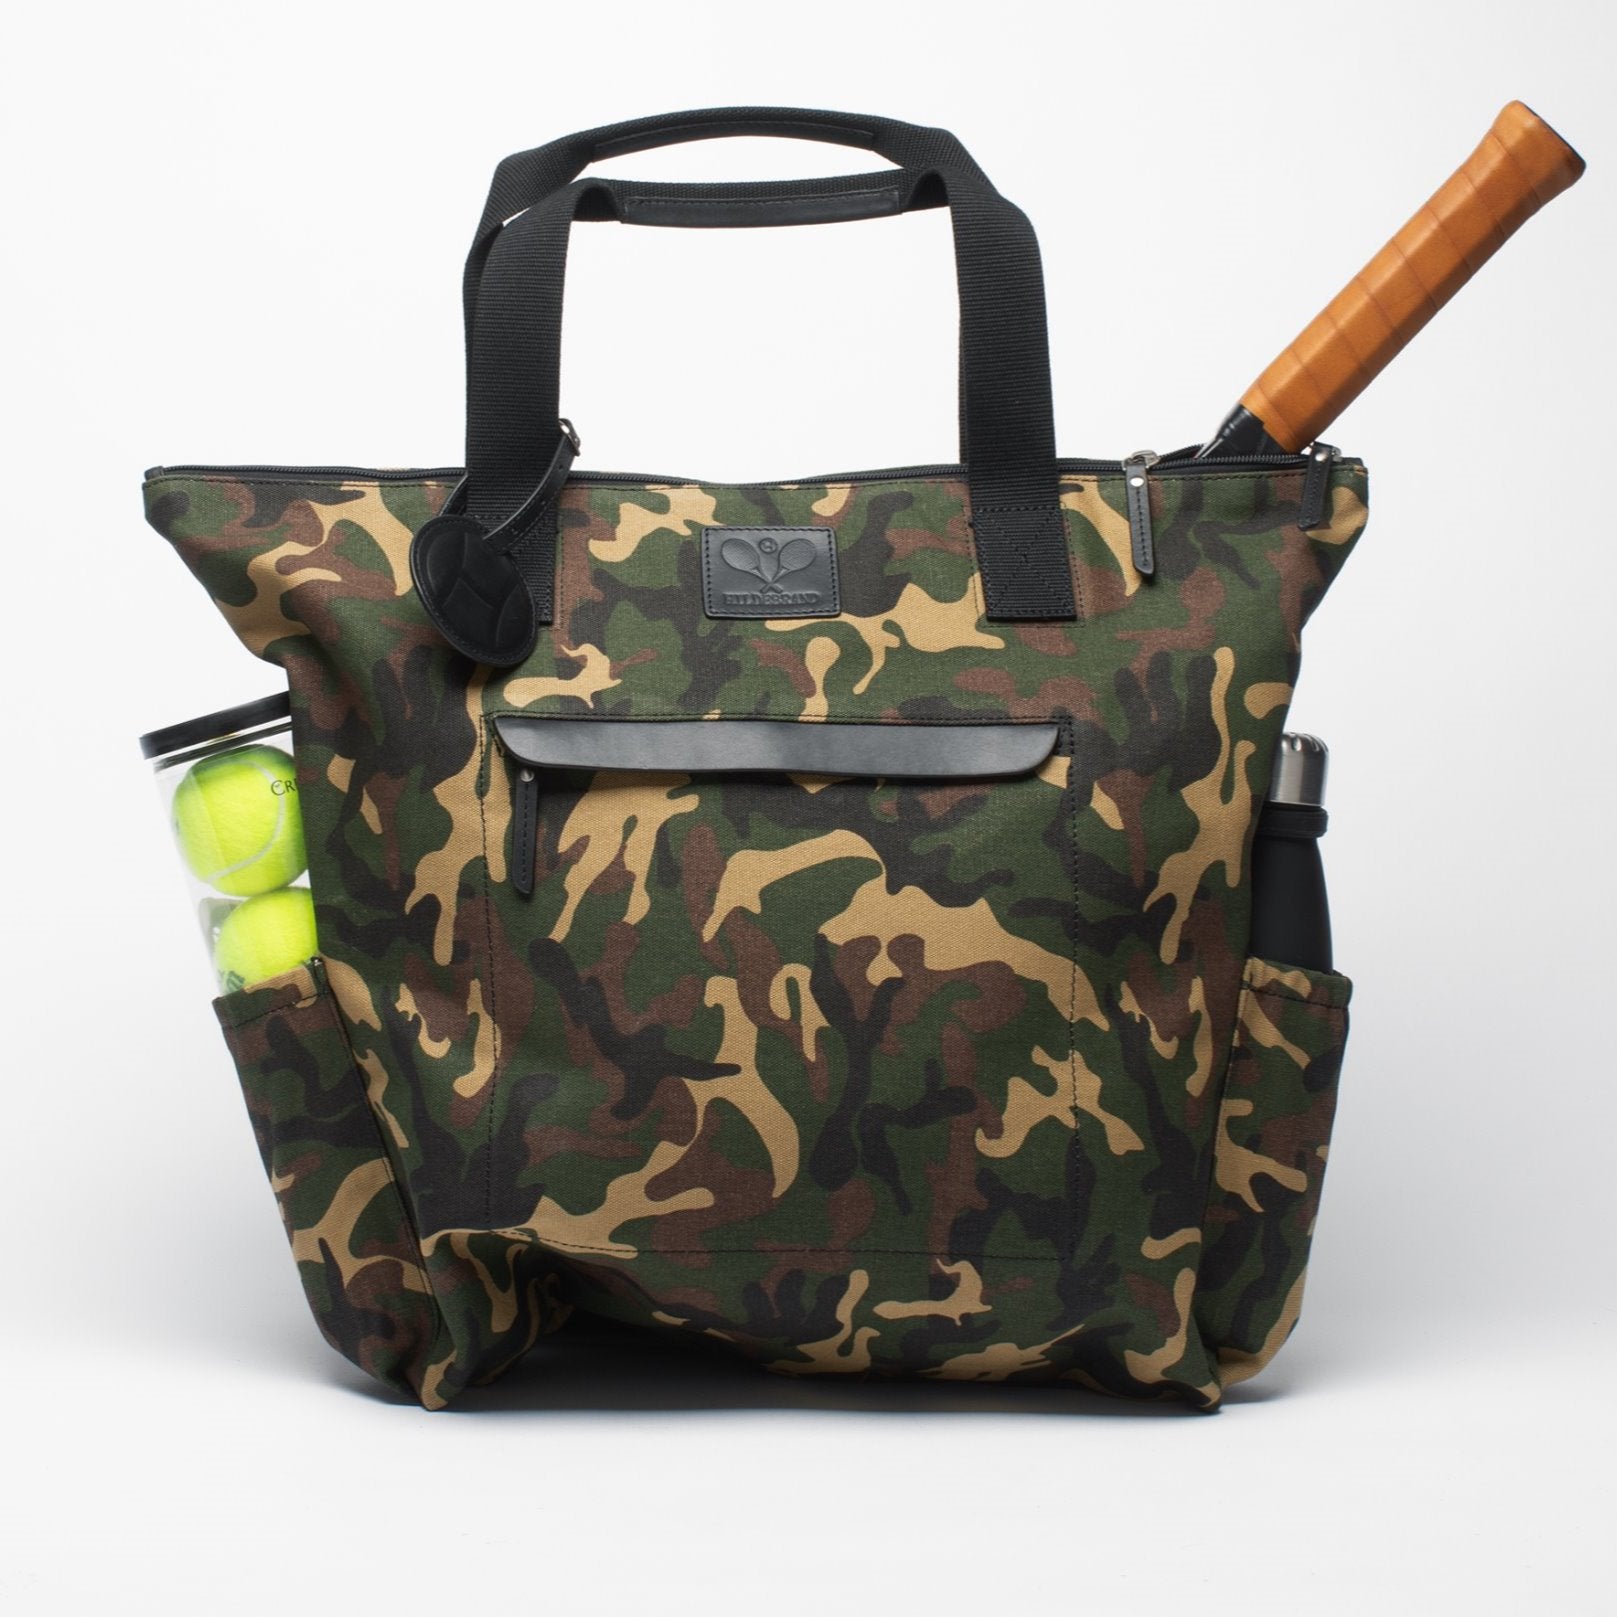 Tennis Tote Bag Camouflage